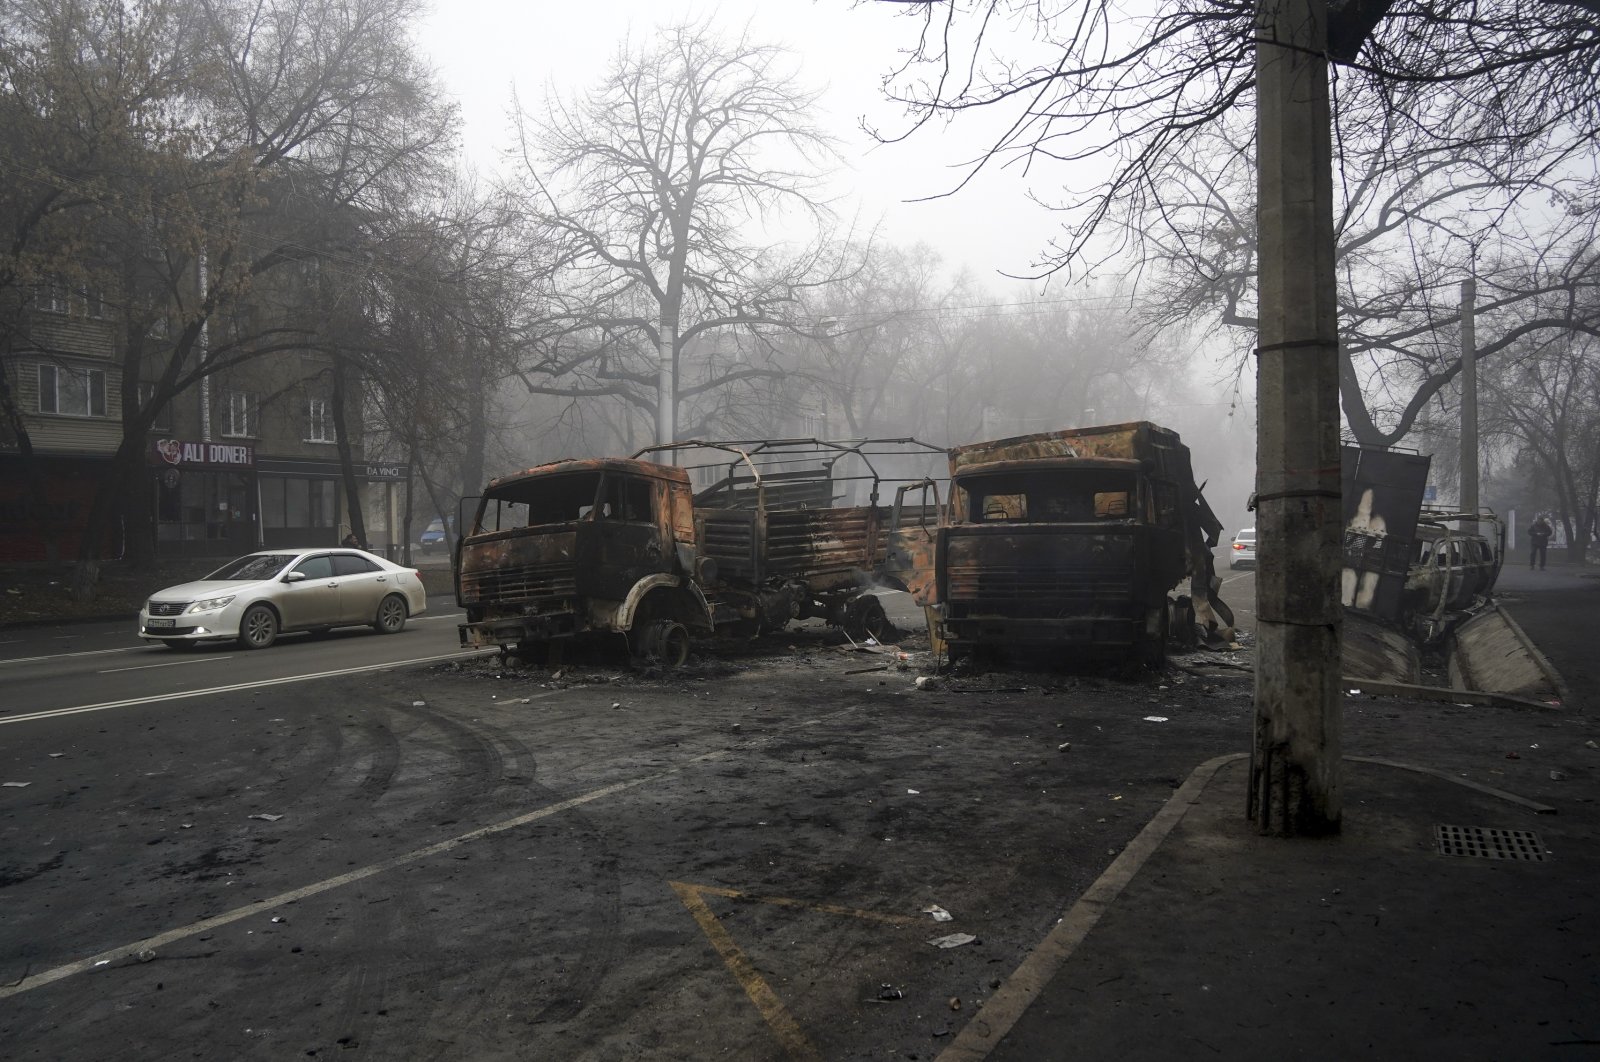 A view of burned military trucks after clashes, on a street in Almaty, Kazakhstan, Jan. 6, 2022. (AP Photo)